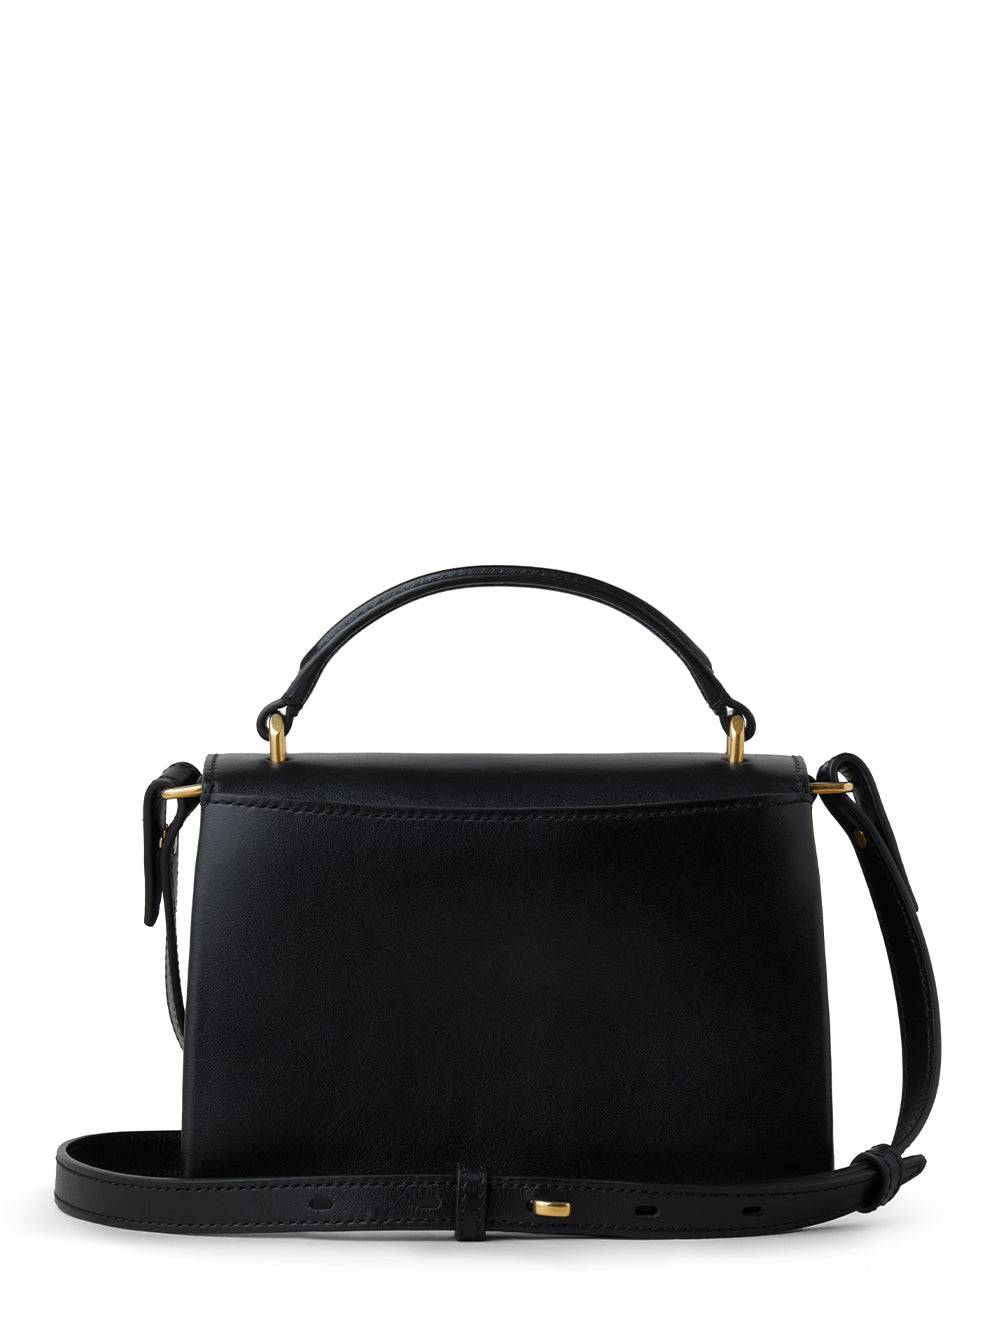 Mulberry-SmallLanaTopHandle-BlackHighGlossLeather-2